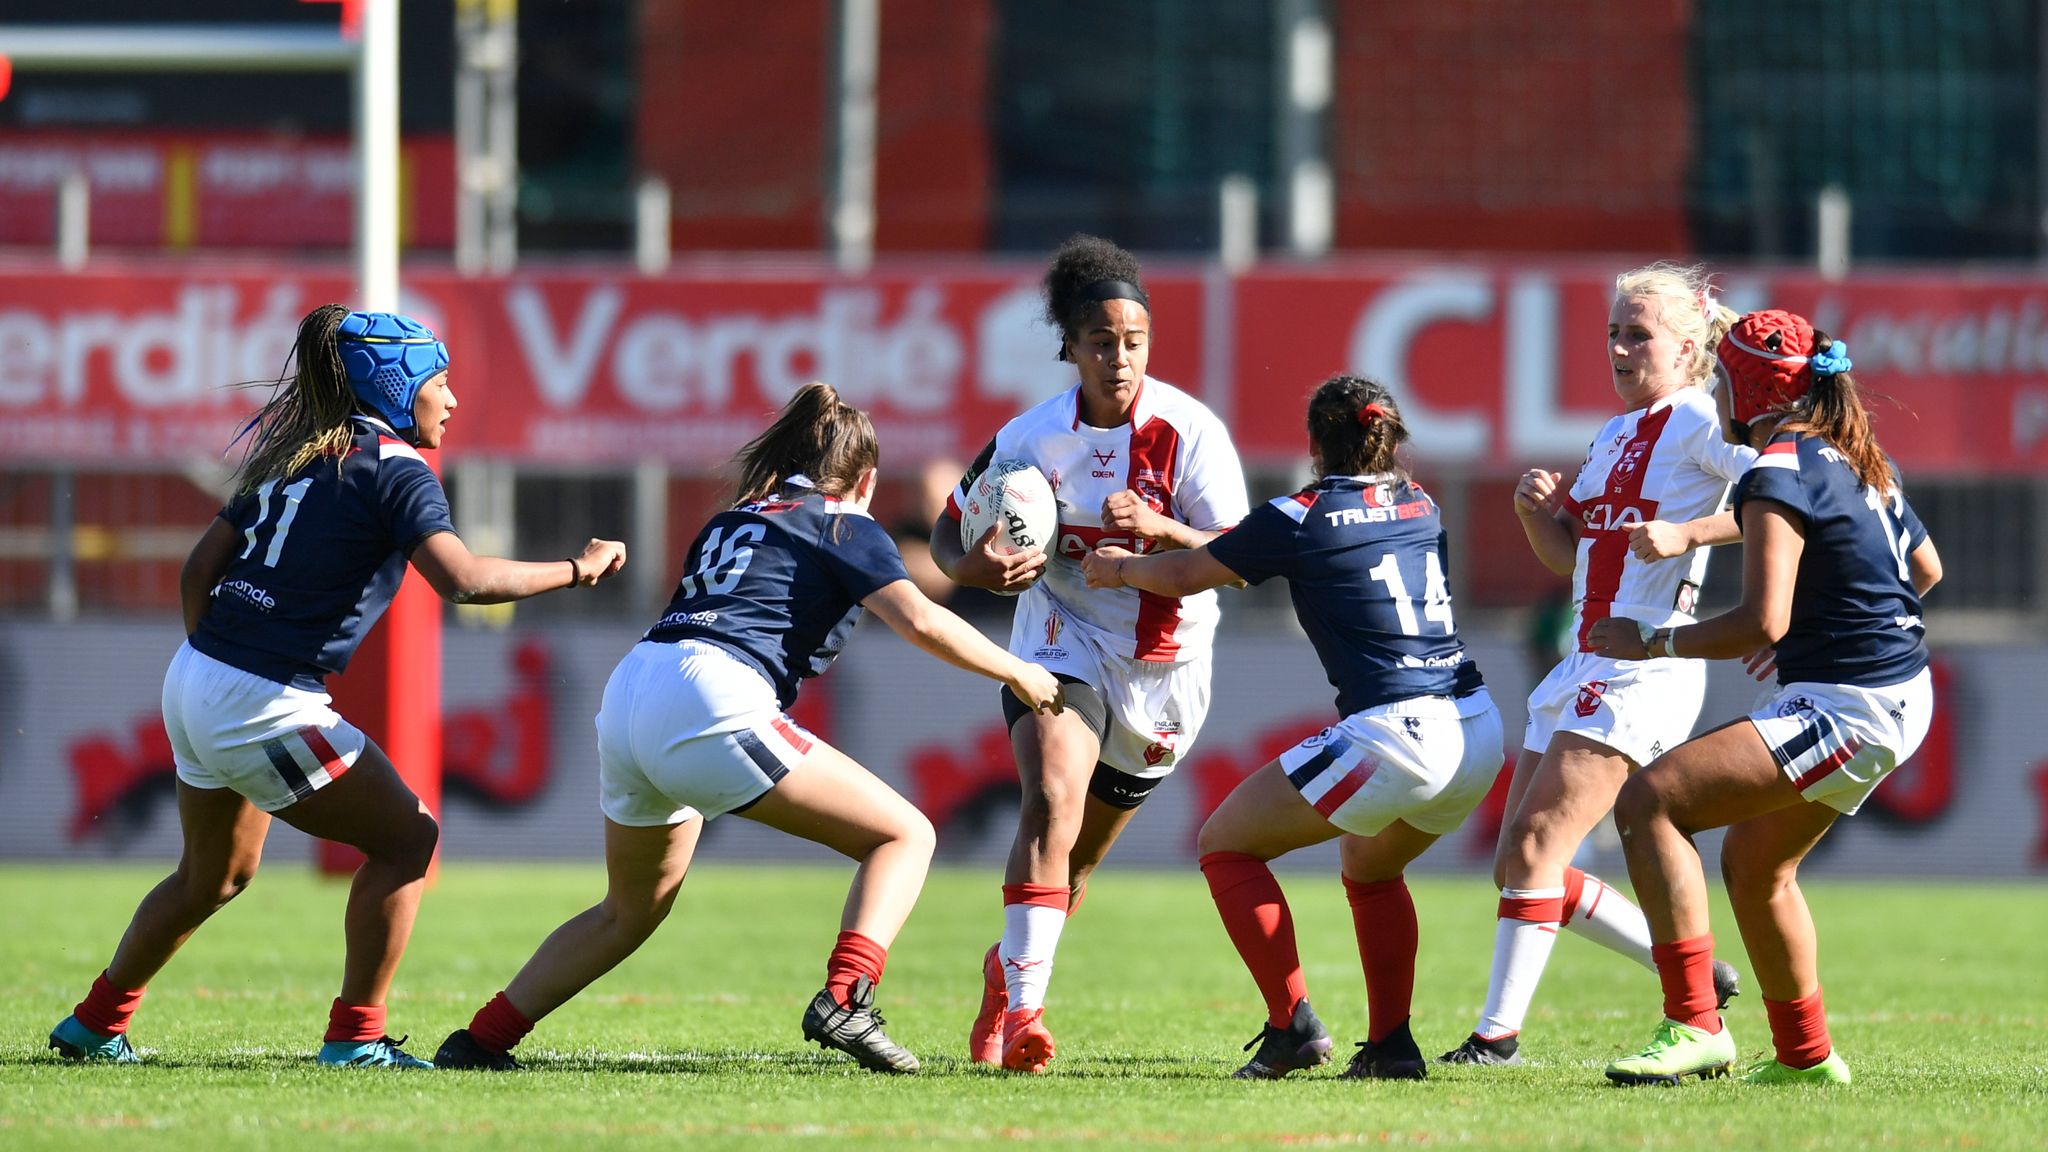 Increasing post-pandemic participation in USA Rugby's events – IXD